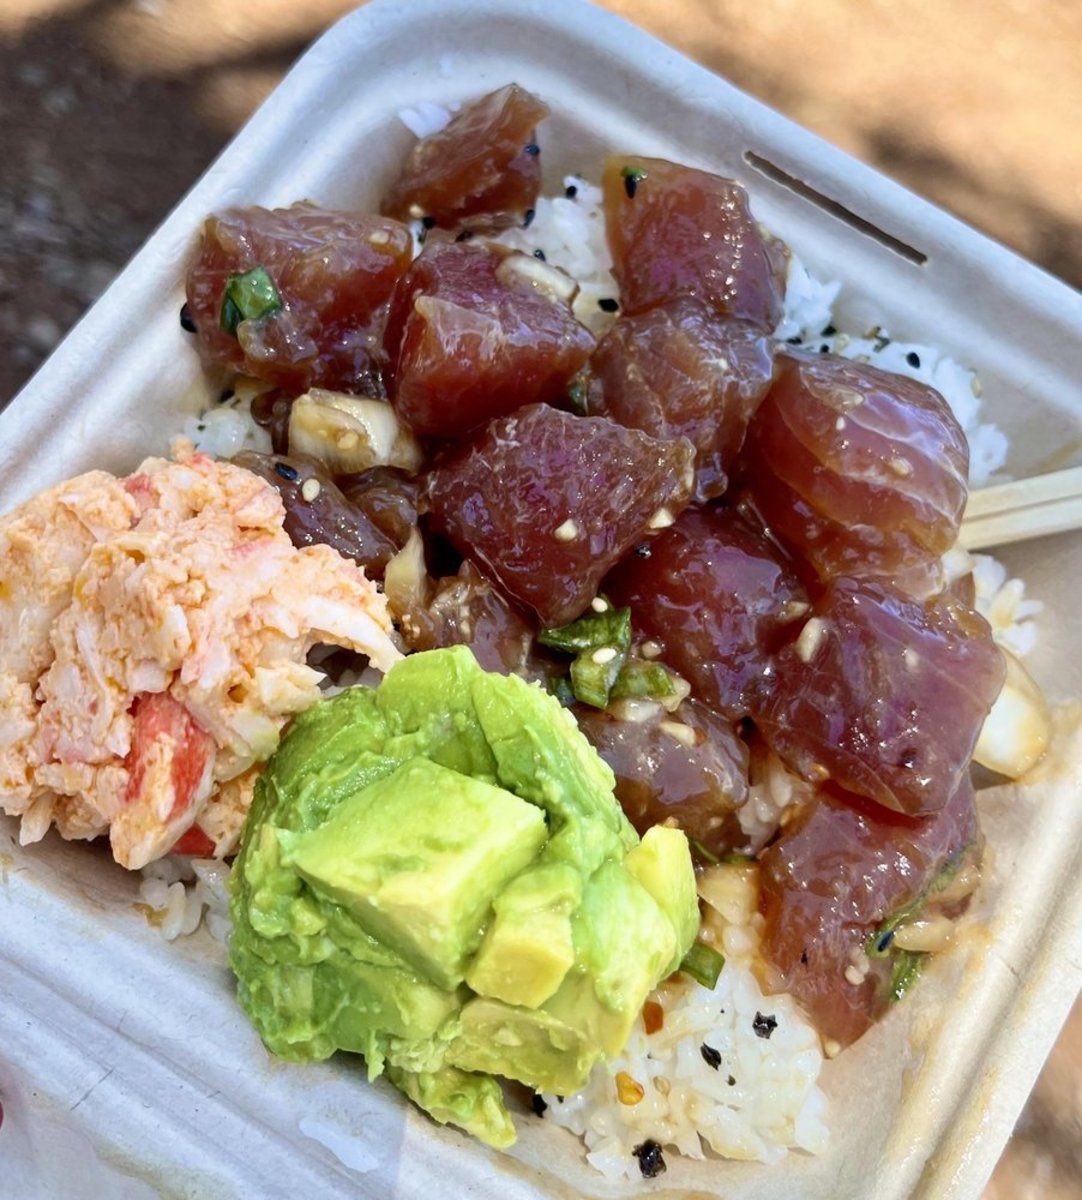 Ummm ... if this beautiful poke with fresh guacamole and spicy crab salad from Kahiau's Food Truck doesn't make you drool, then you must be someone who hasn't tried poke yet.